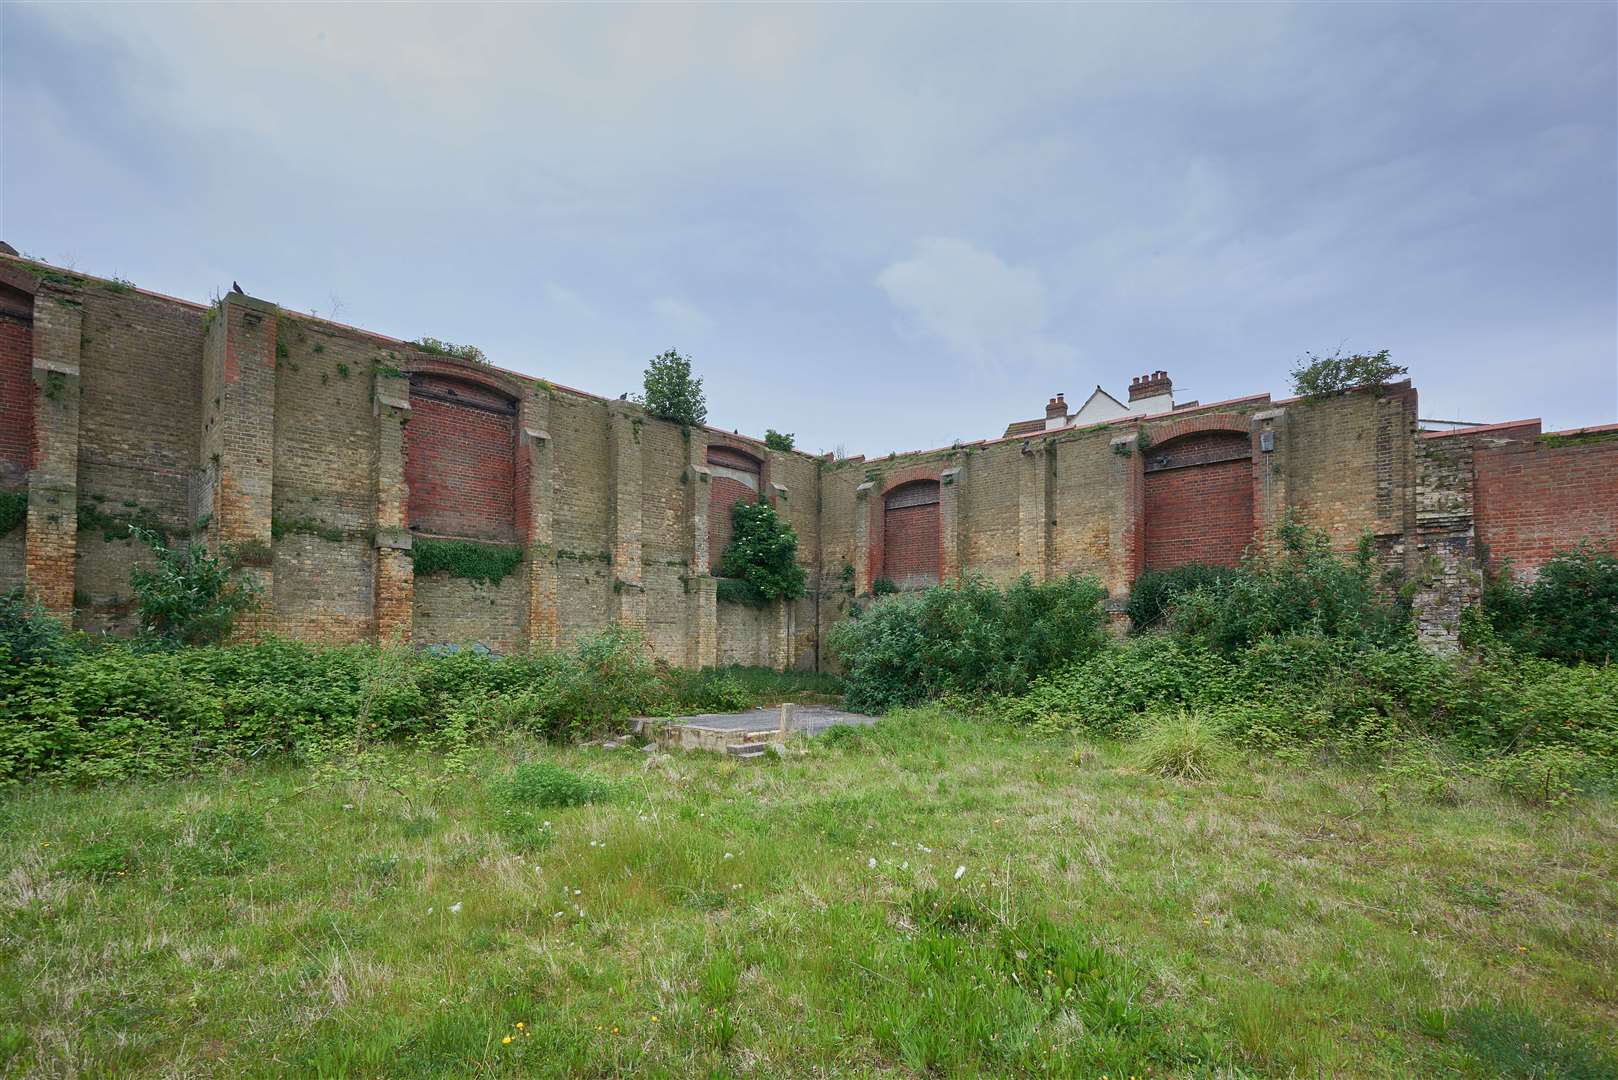 The land at the derelict gasworks site